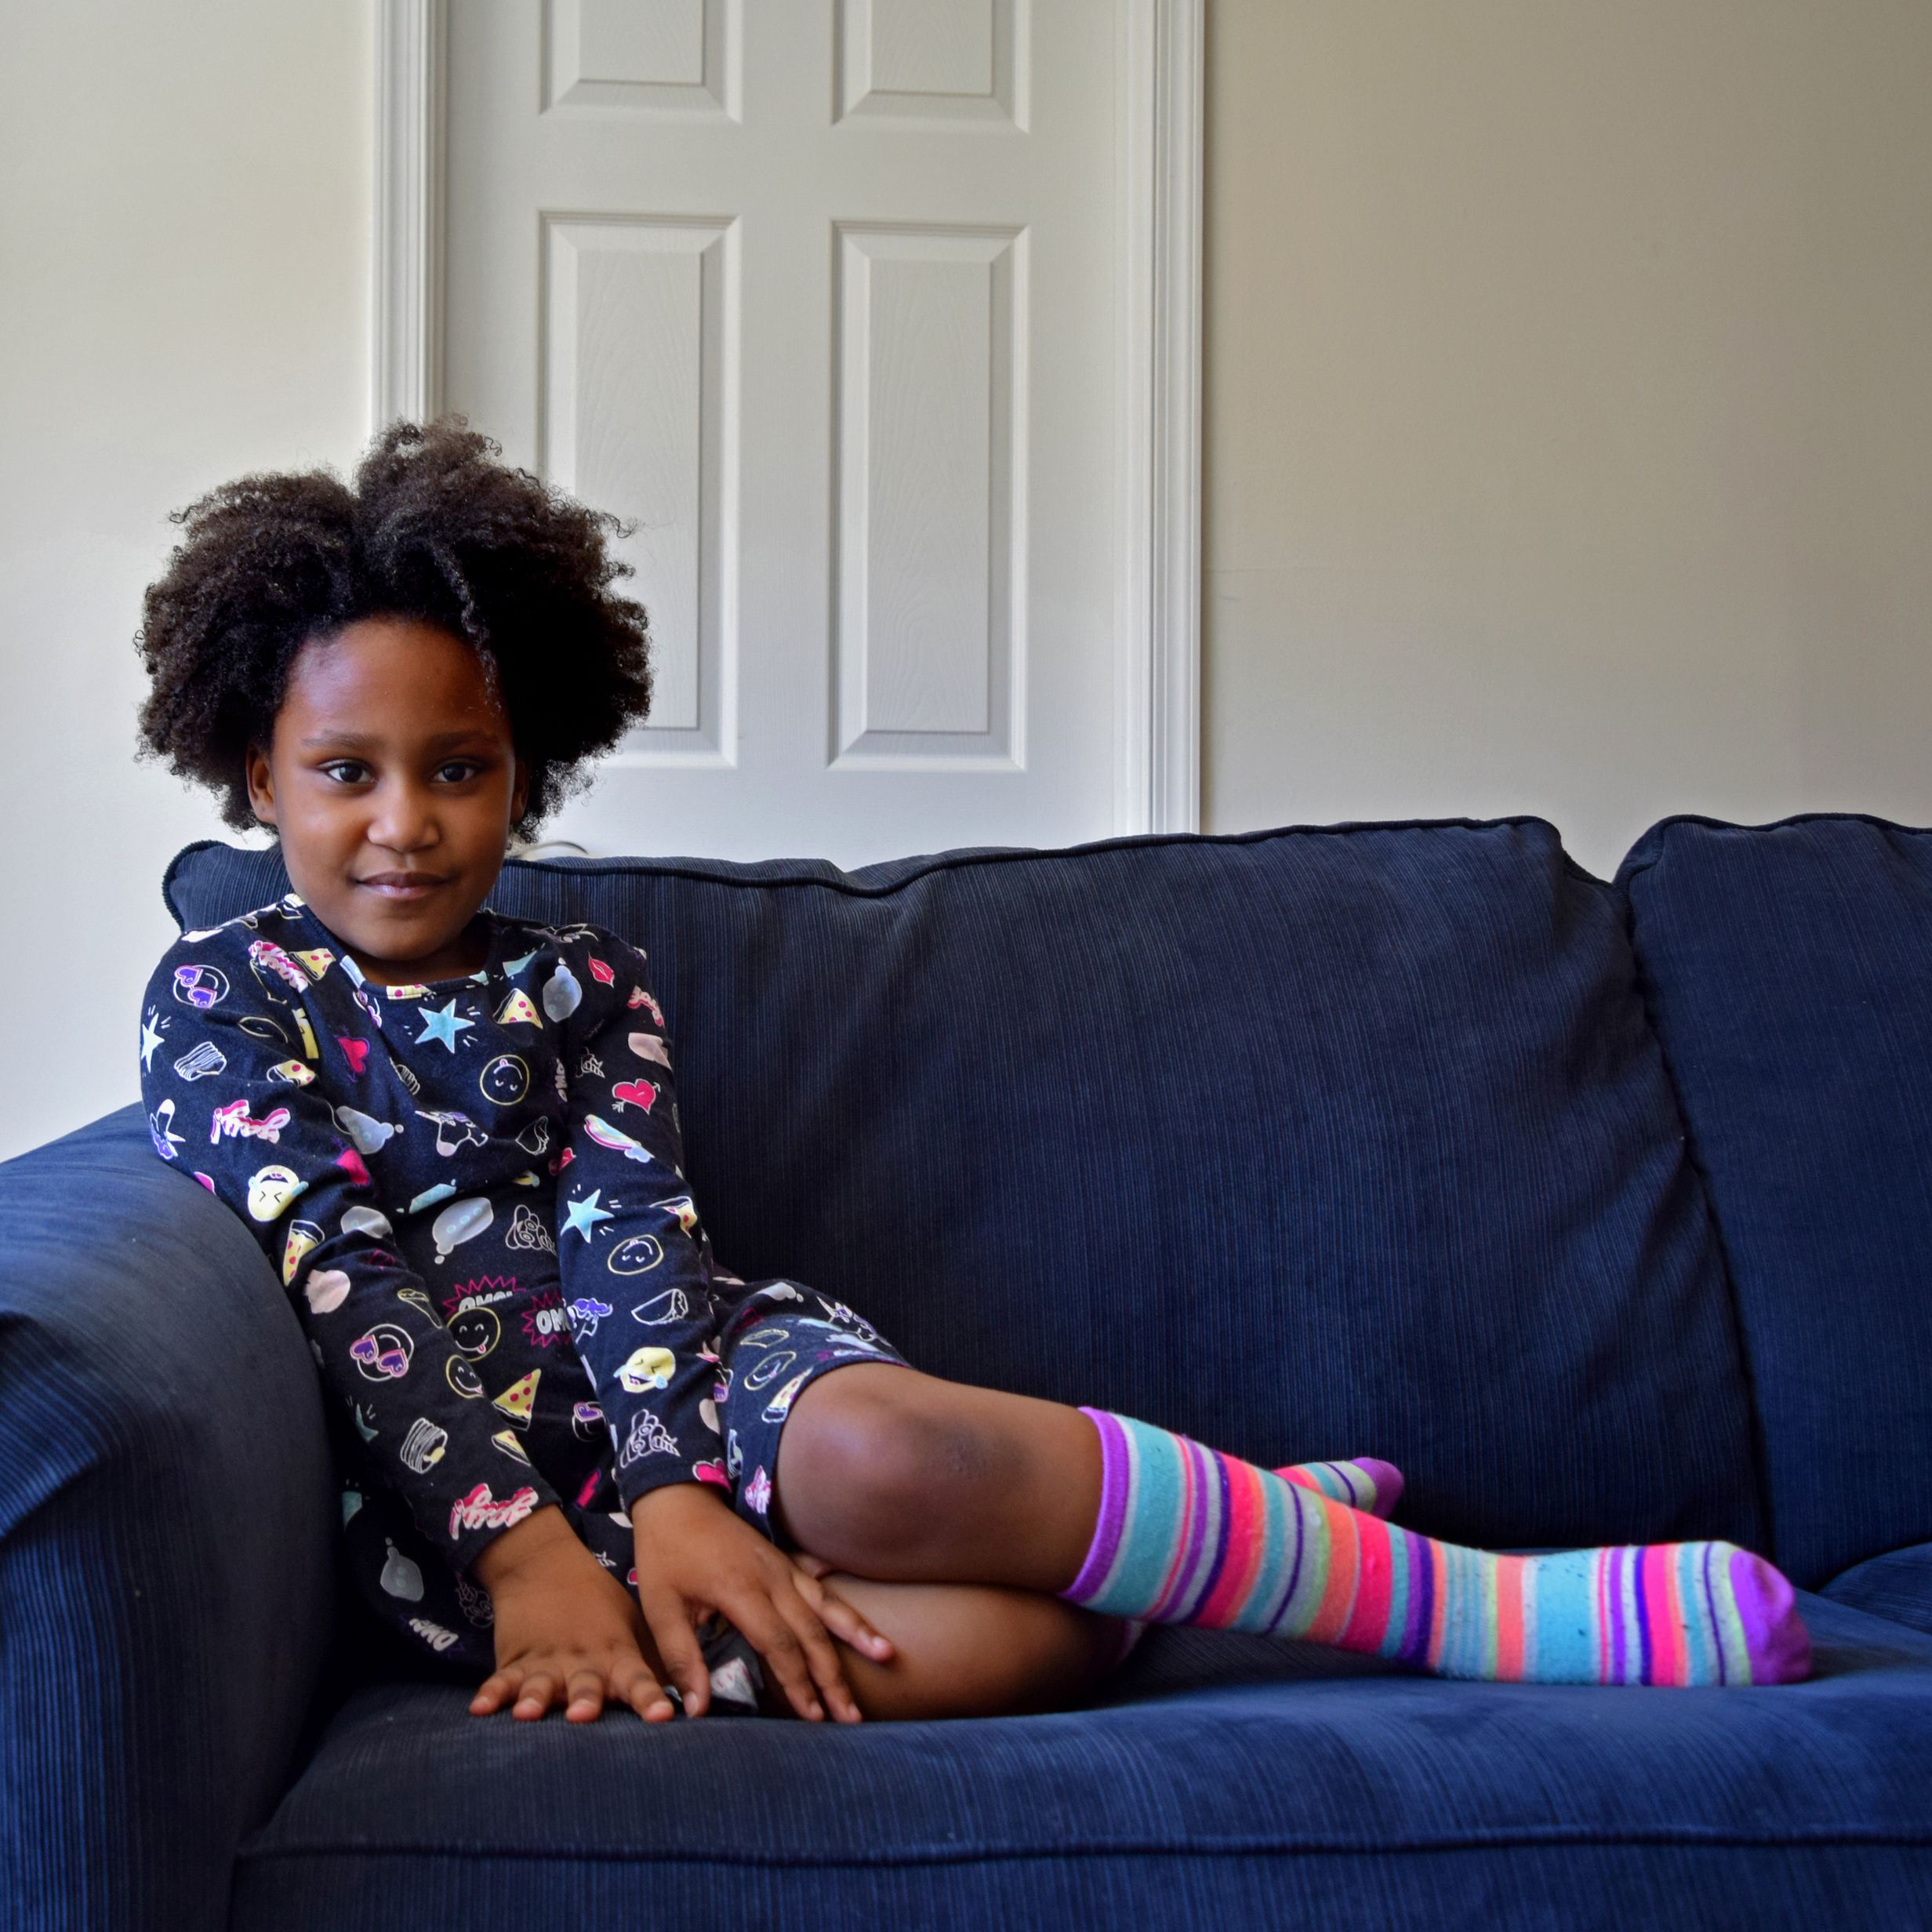 The Challenge of Raising a Black Girl to Feel Beautiful